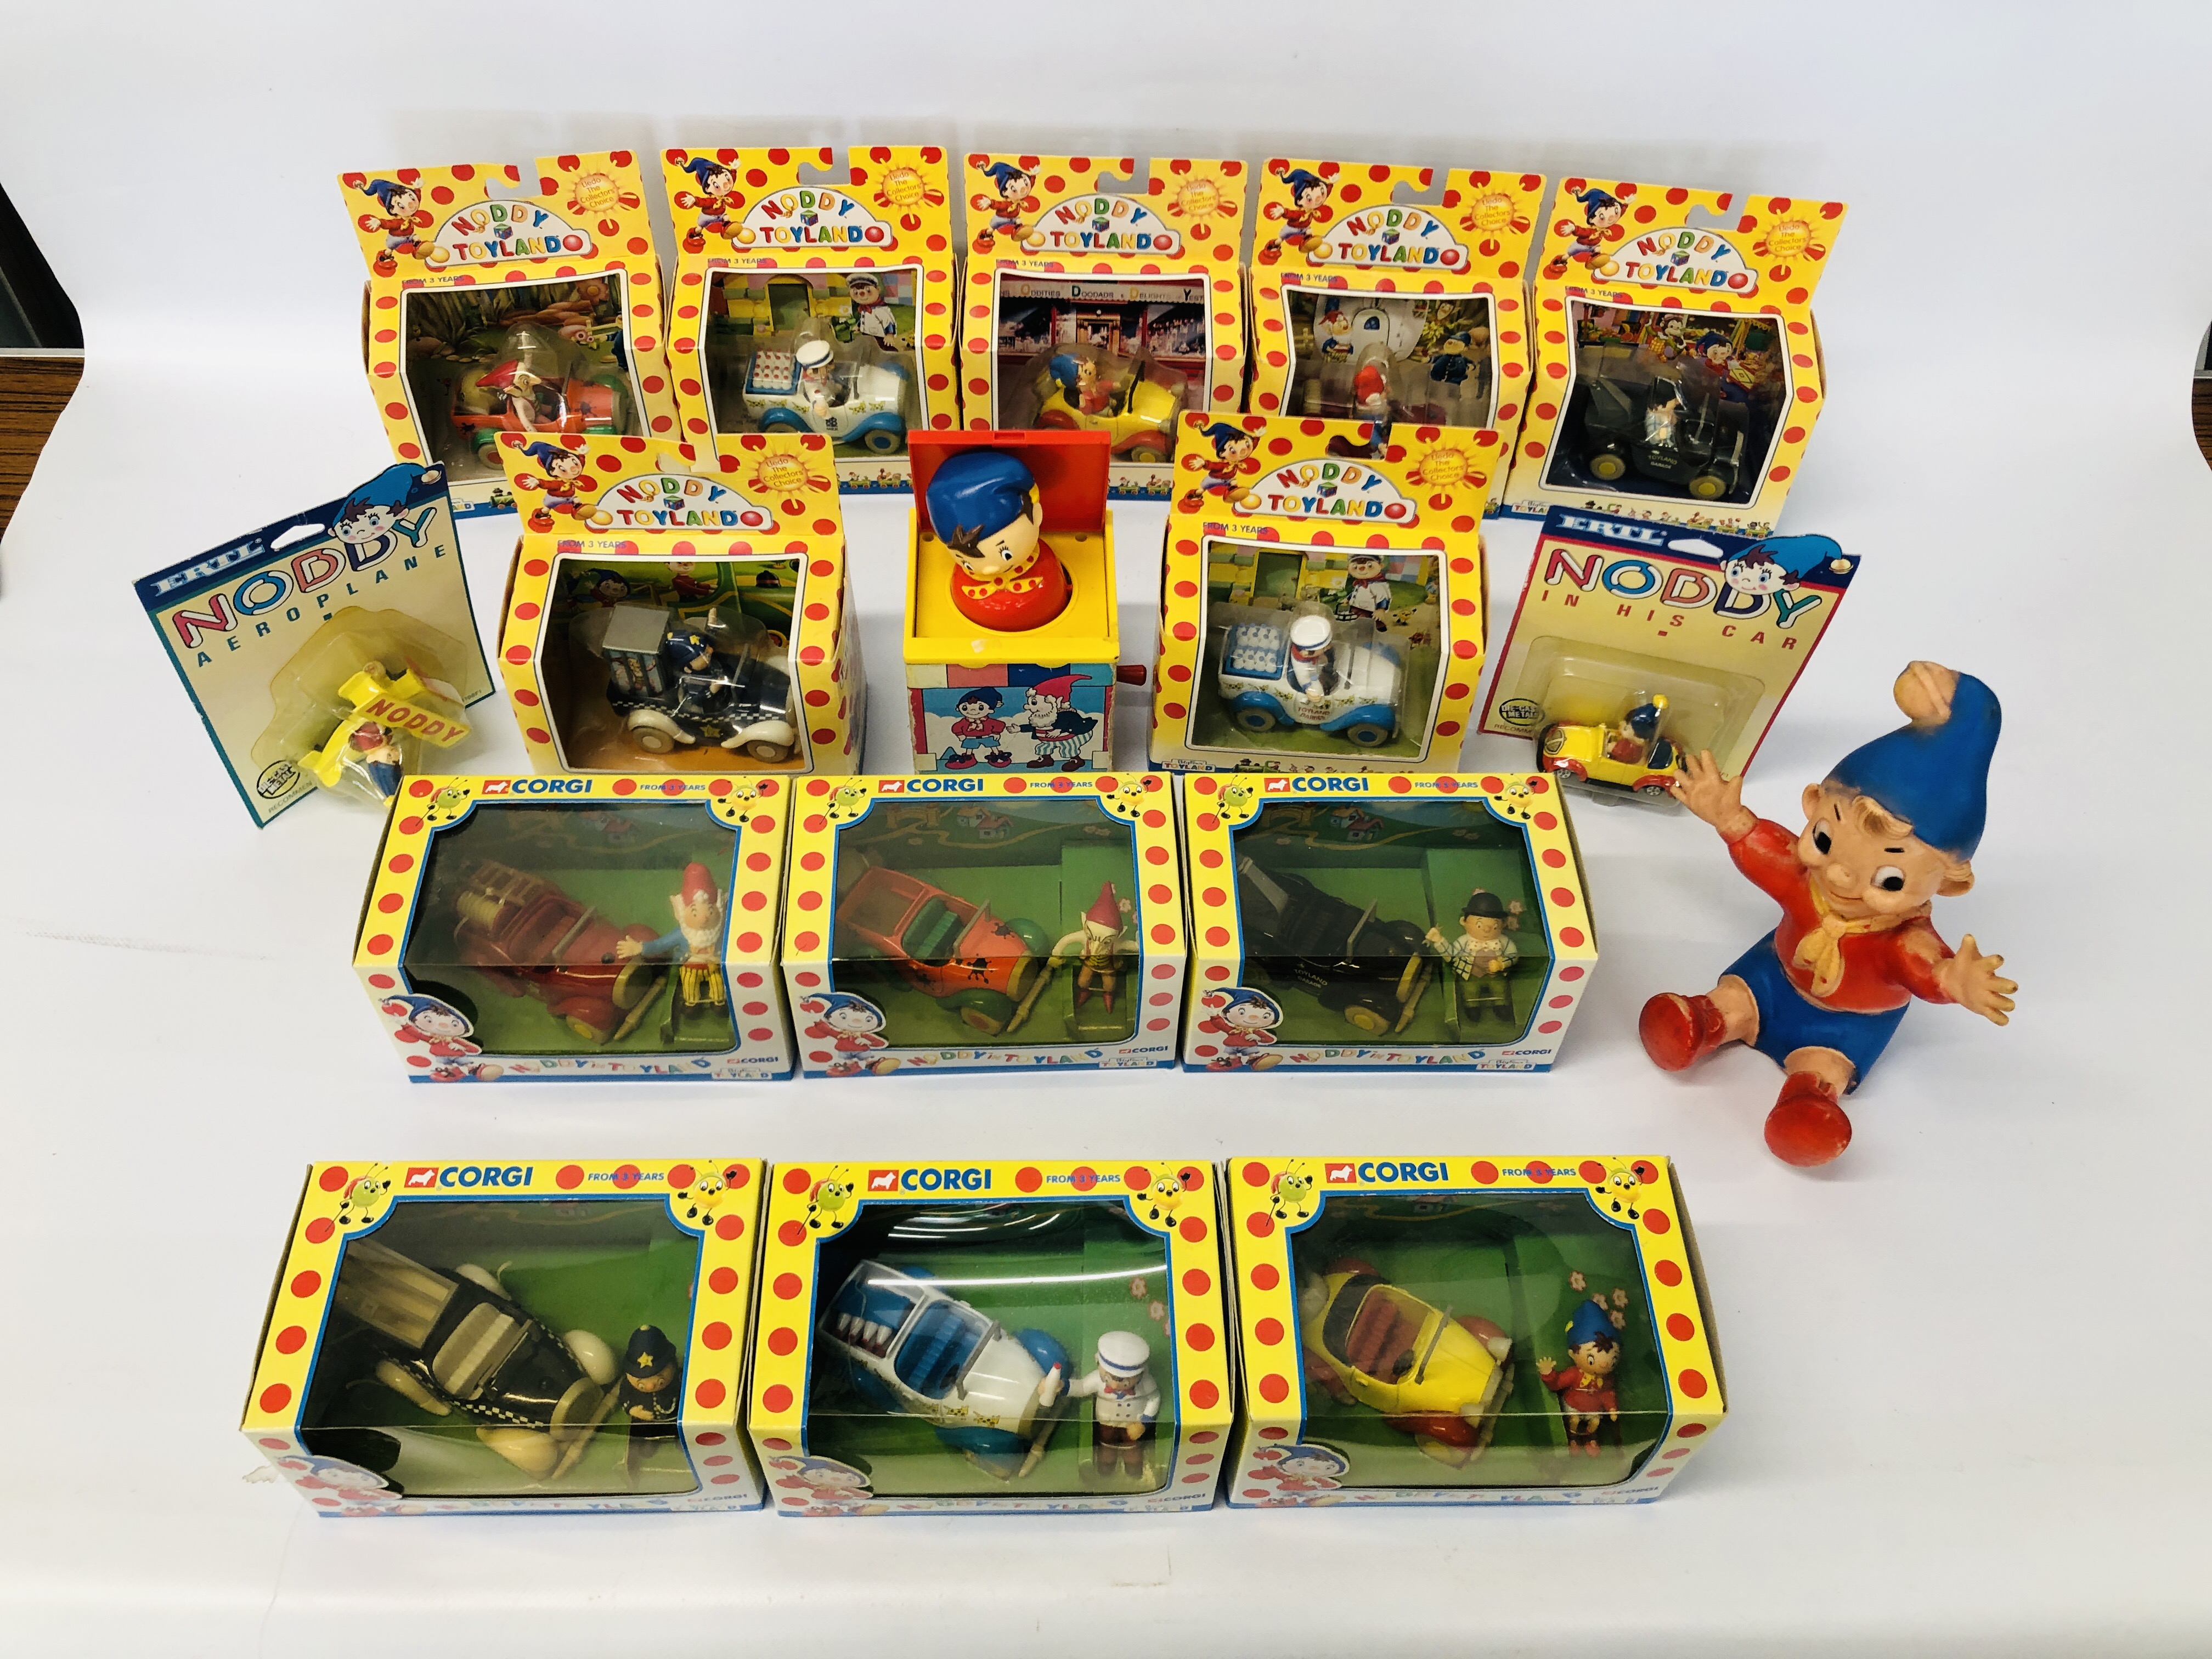 2 X BOXES OF NODDY RELATED COLLECTORS DIE-CAST VEHICLES/MODELS TO INCLUDE 6 X CORGI, 7 X LLEDO,